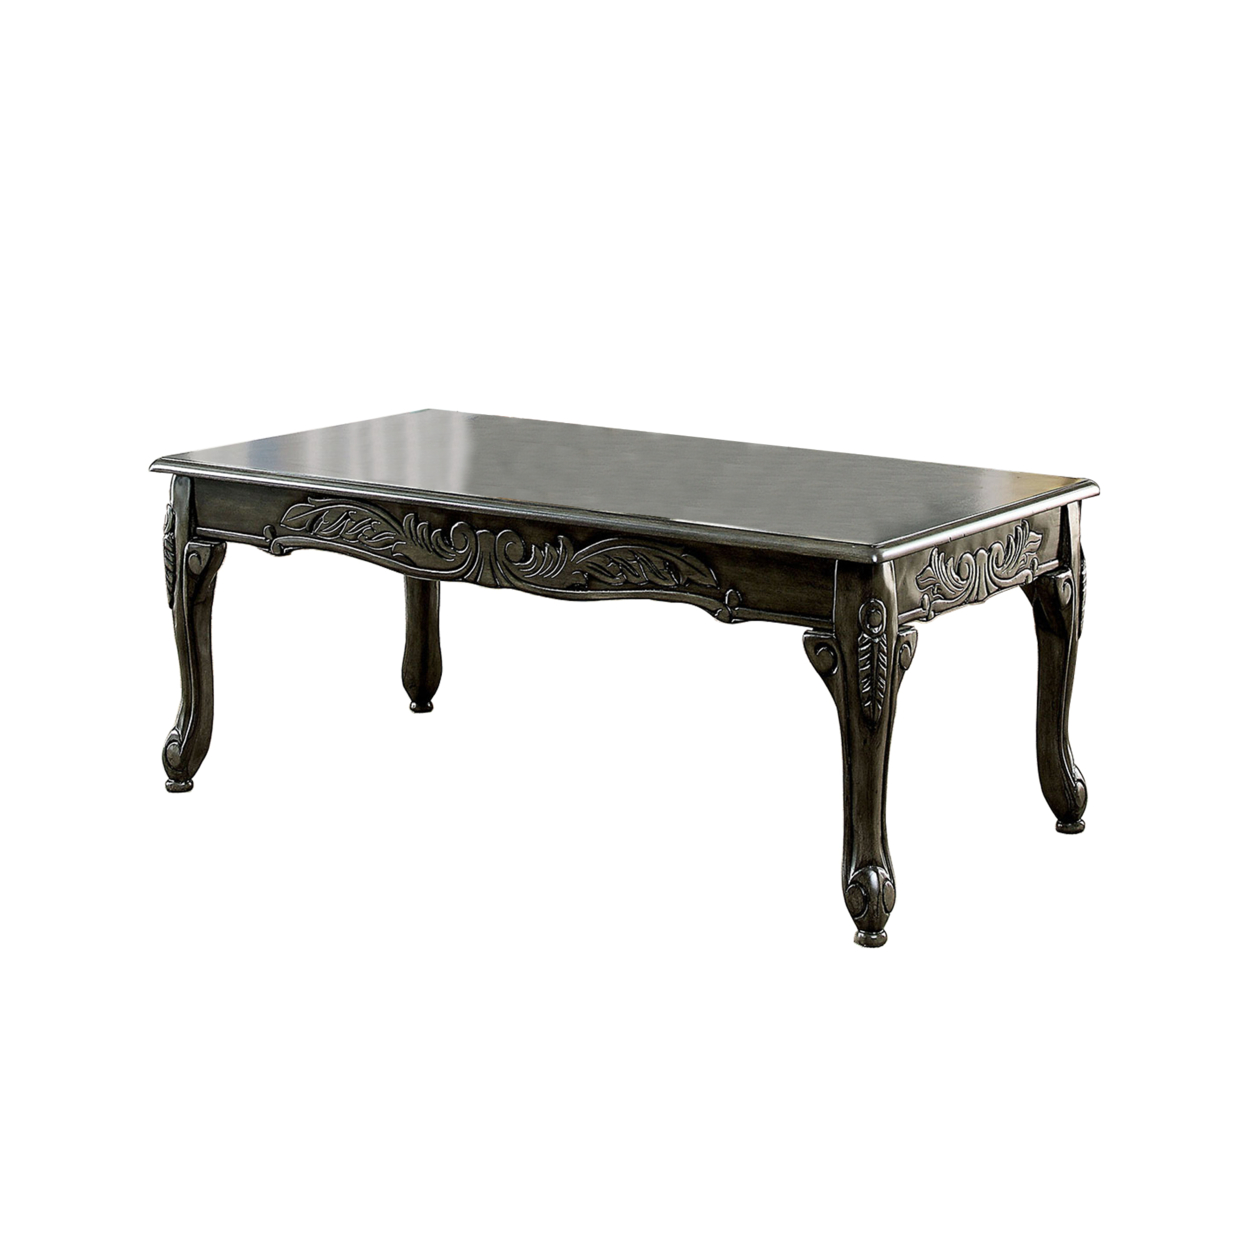 3 Piece Table Set With Cabriole Legs And Wooden Floral Motifs, Gray- Saltoro Sherpi